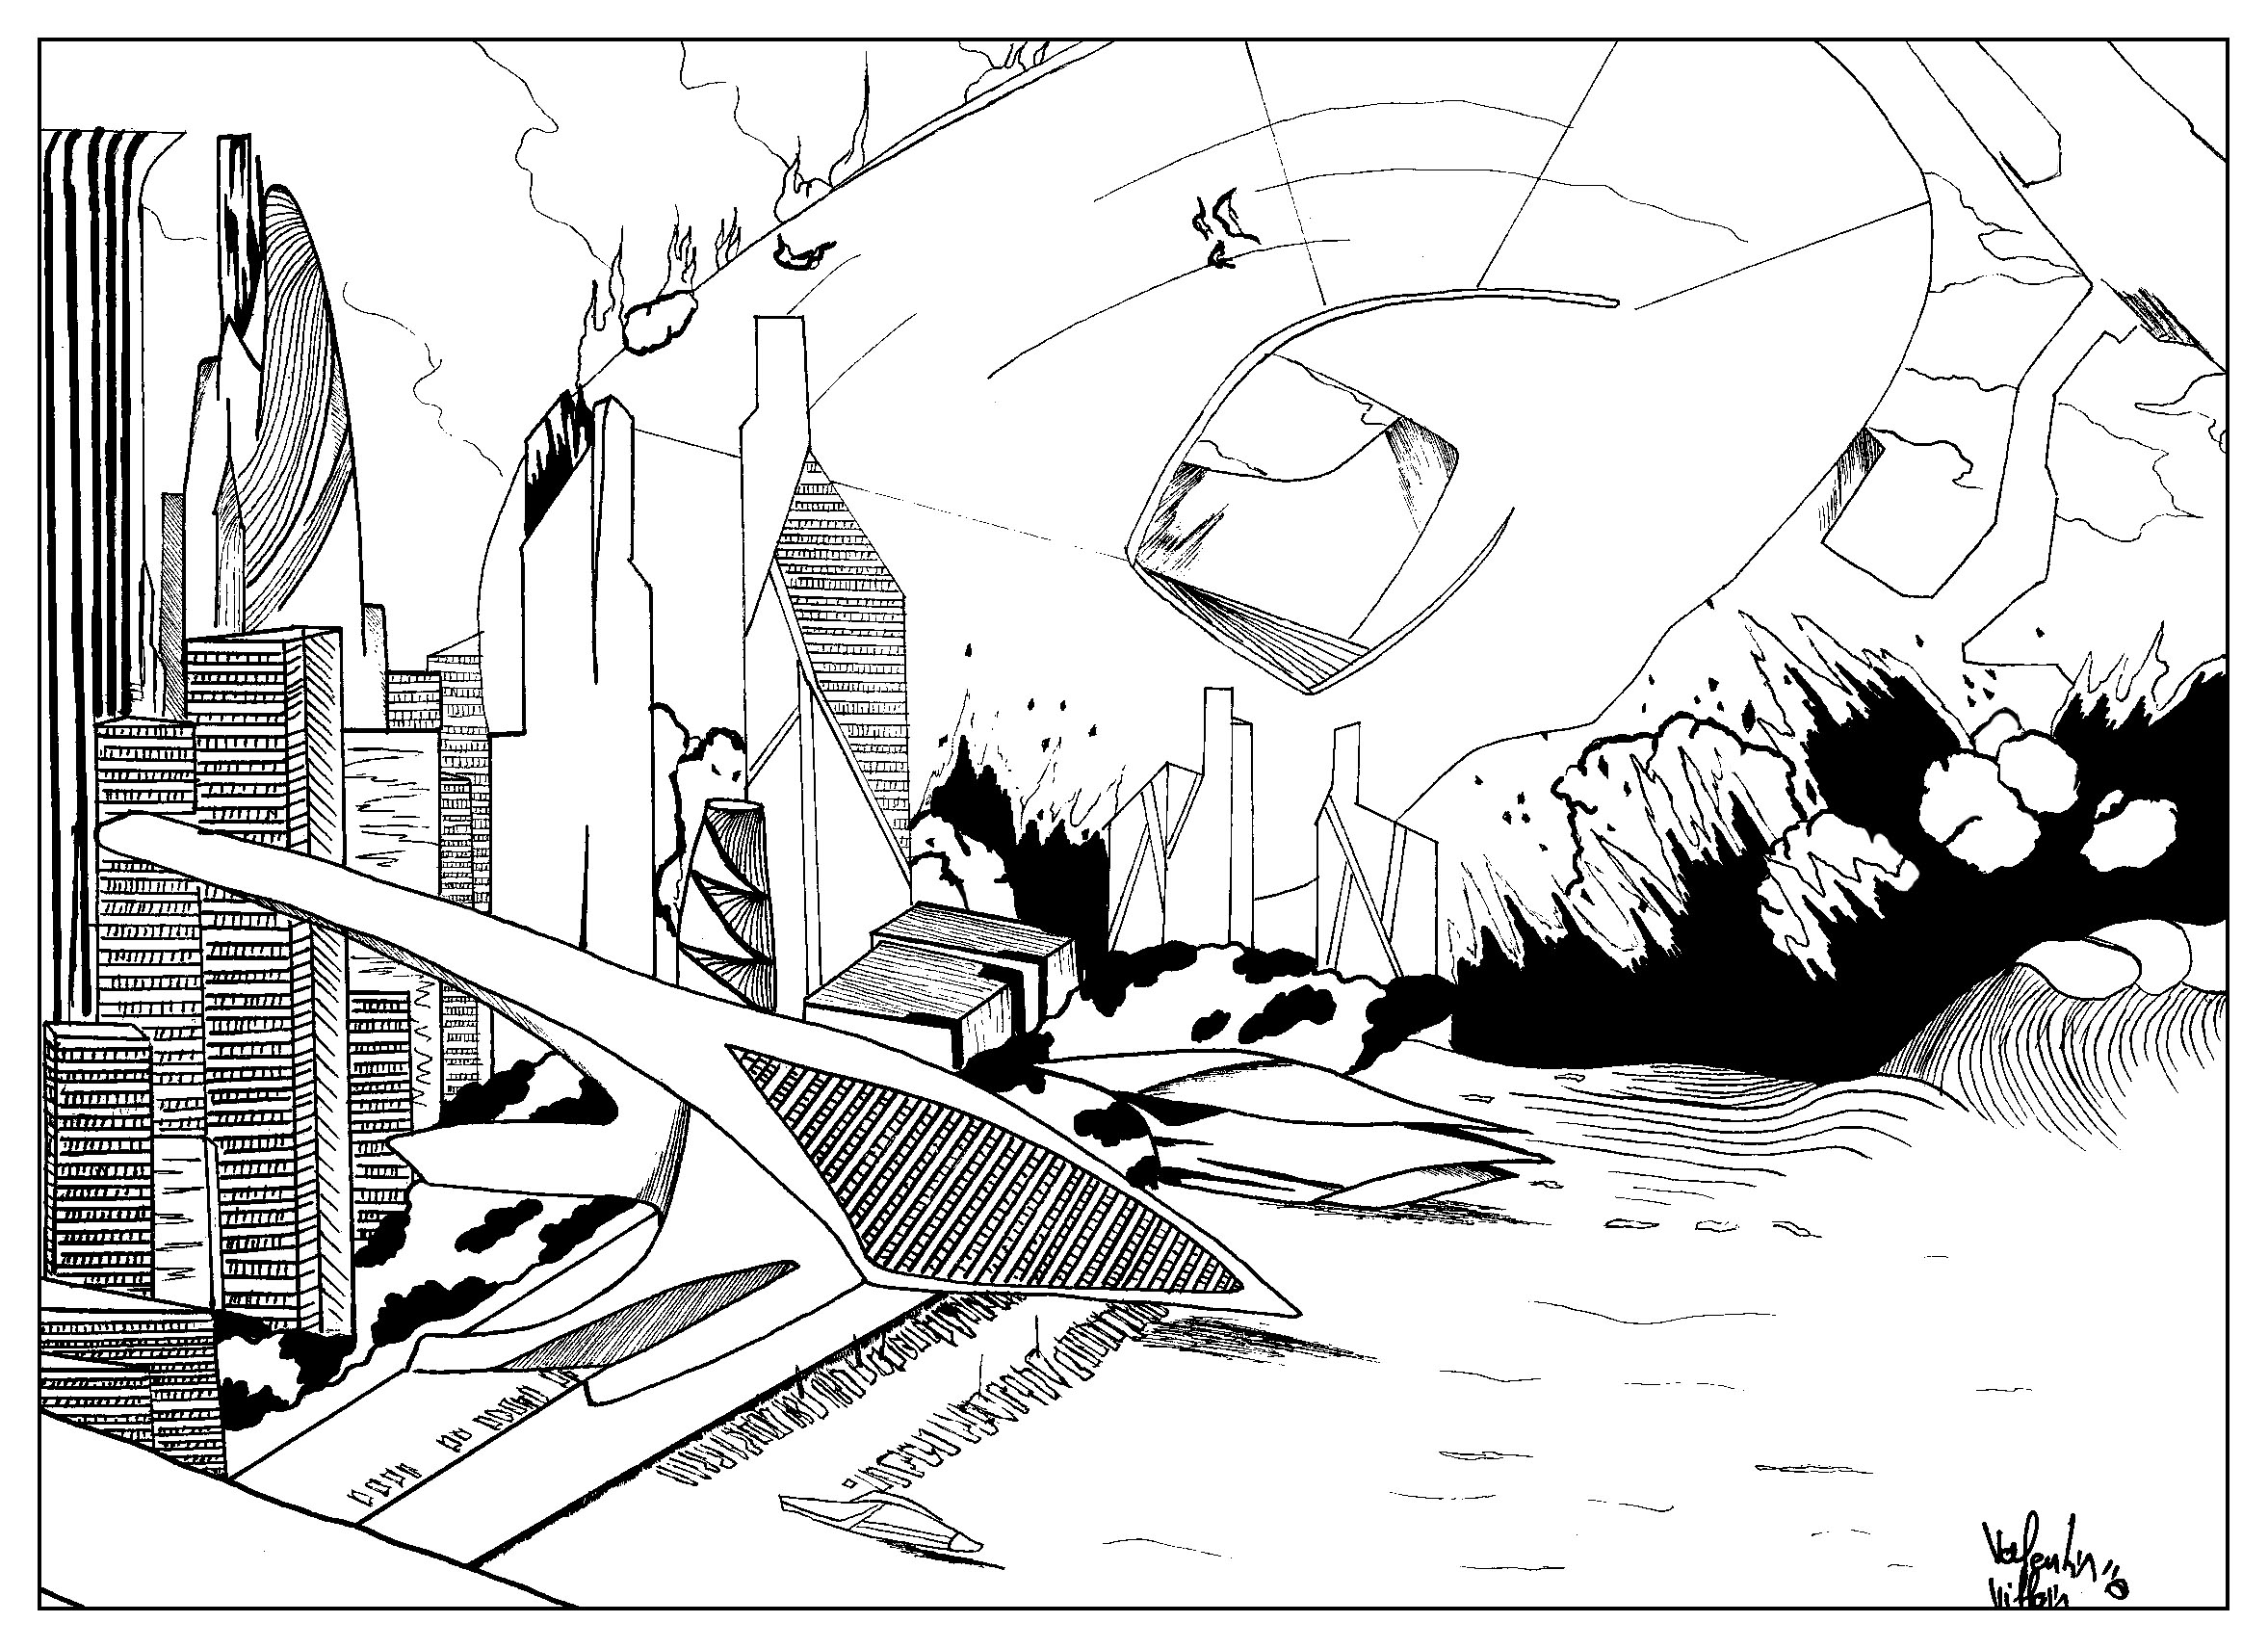 Coloring page inspired by the last scene of the movie Star-Trek into Darkness, Artist : Valentin